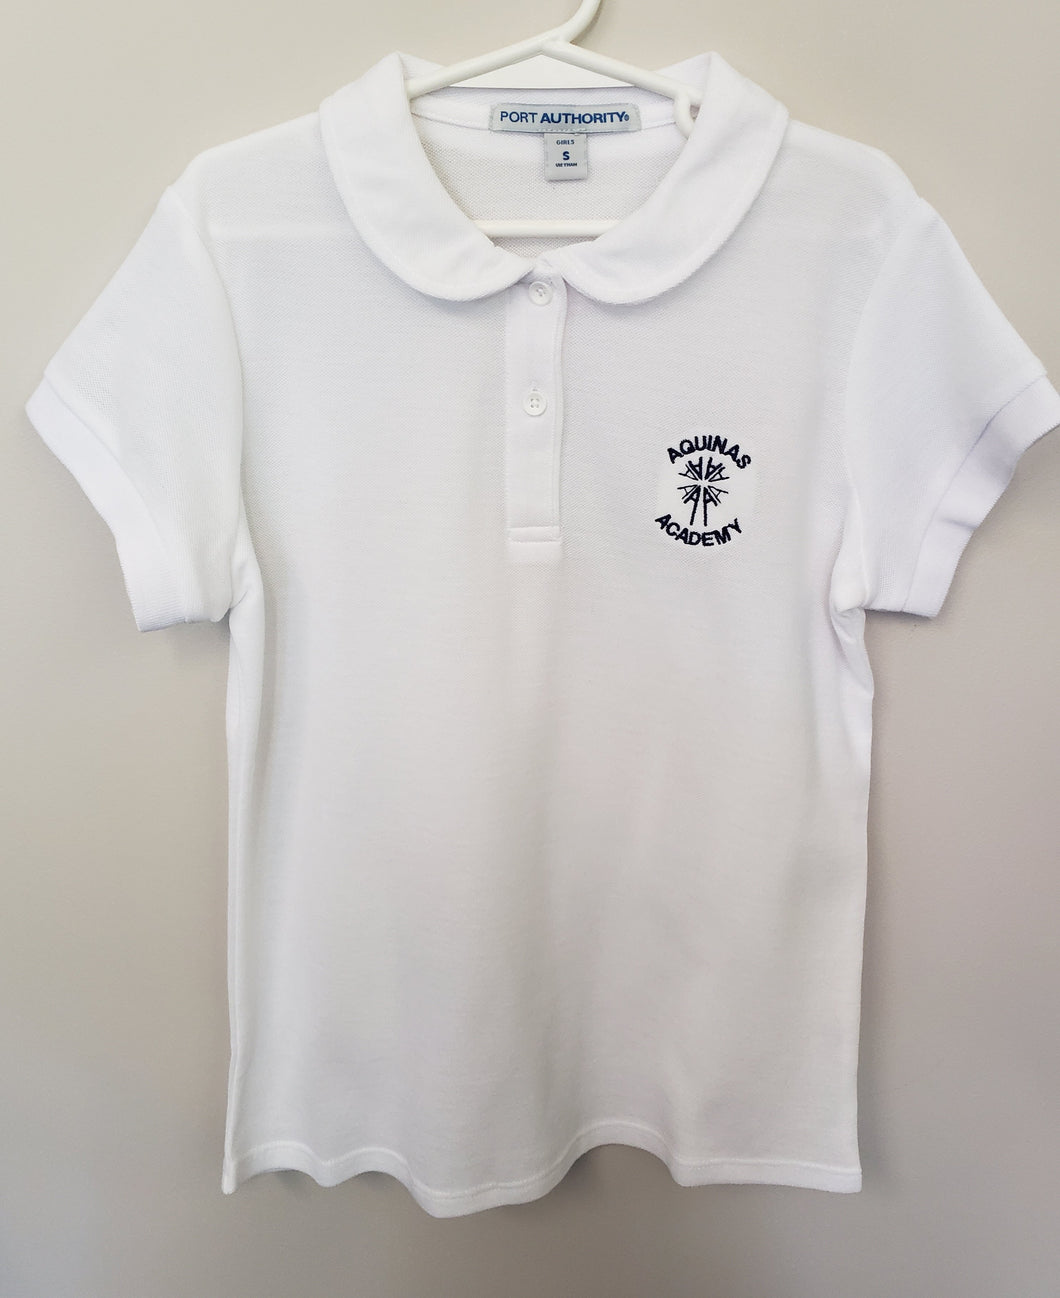 AA010 Aquinas Academy - Peter Pan Collar Polo - White - Youth sizes